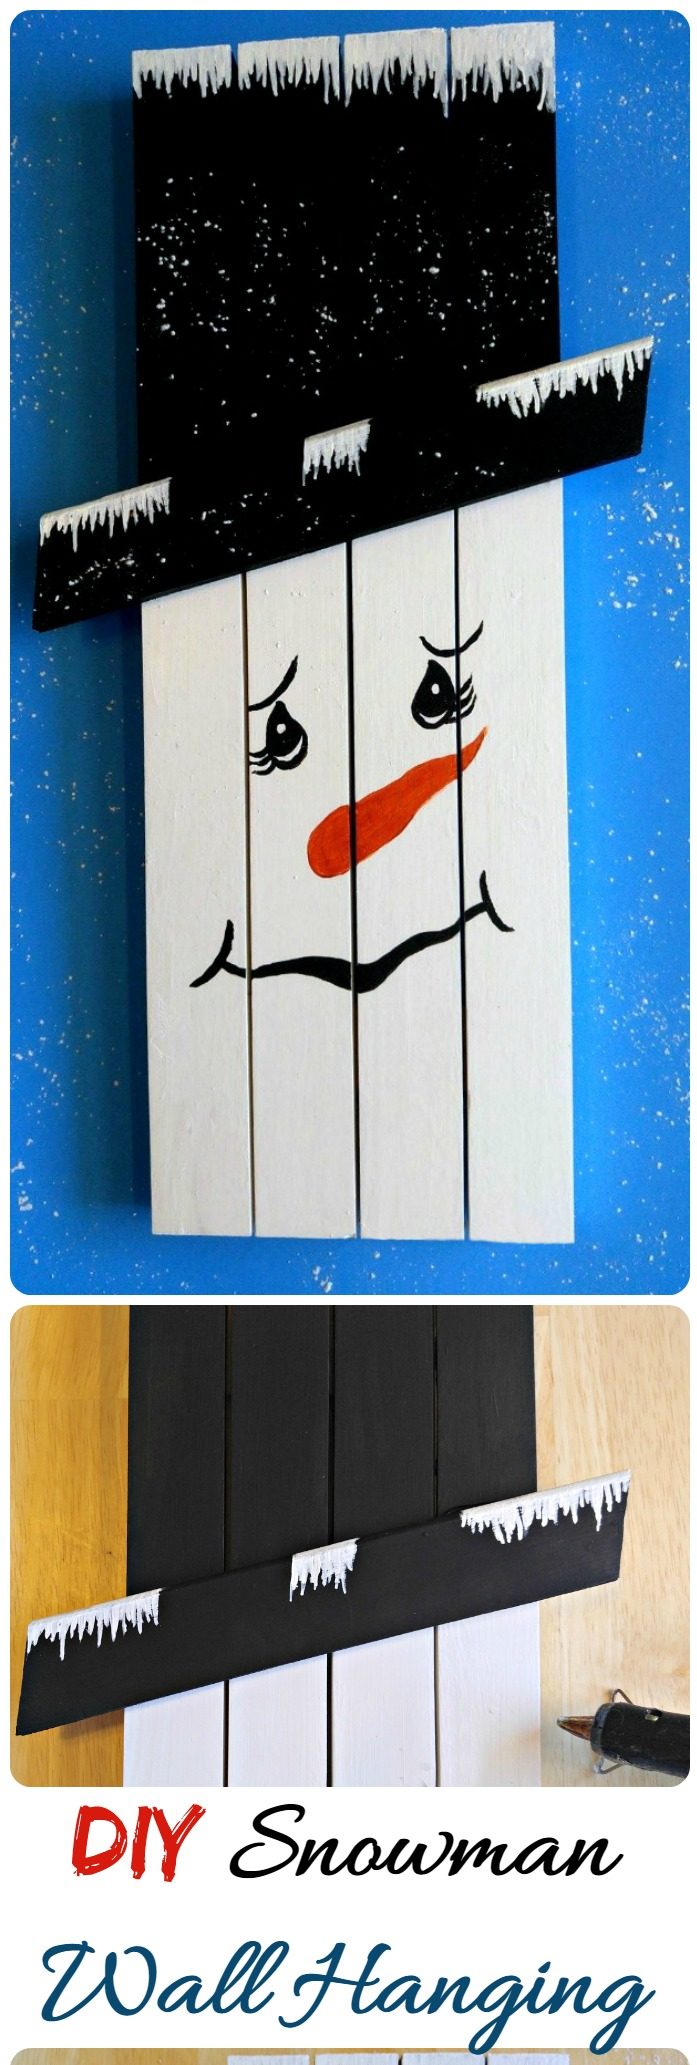 This cute snowman wall hanging was made from a old kitchen door frame. He is easy to do and looks great hanging on a wall. 